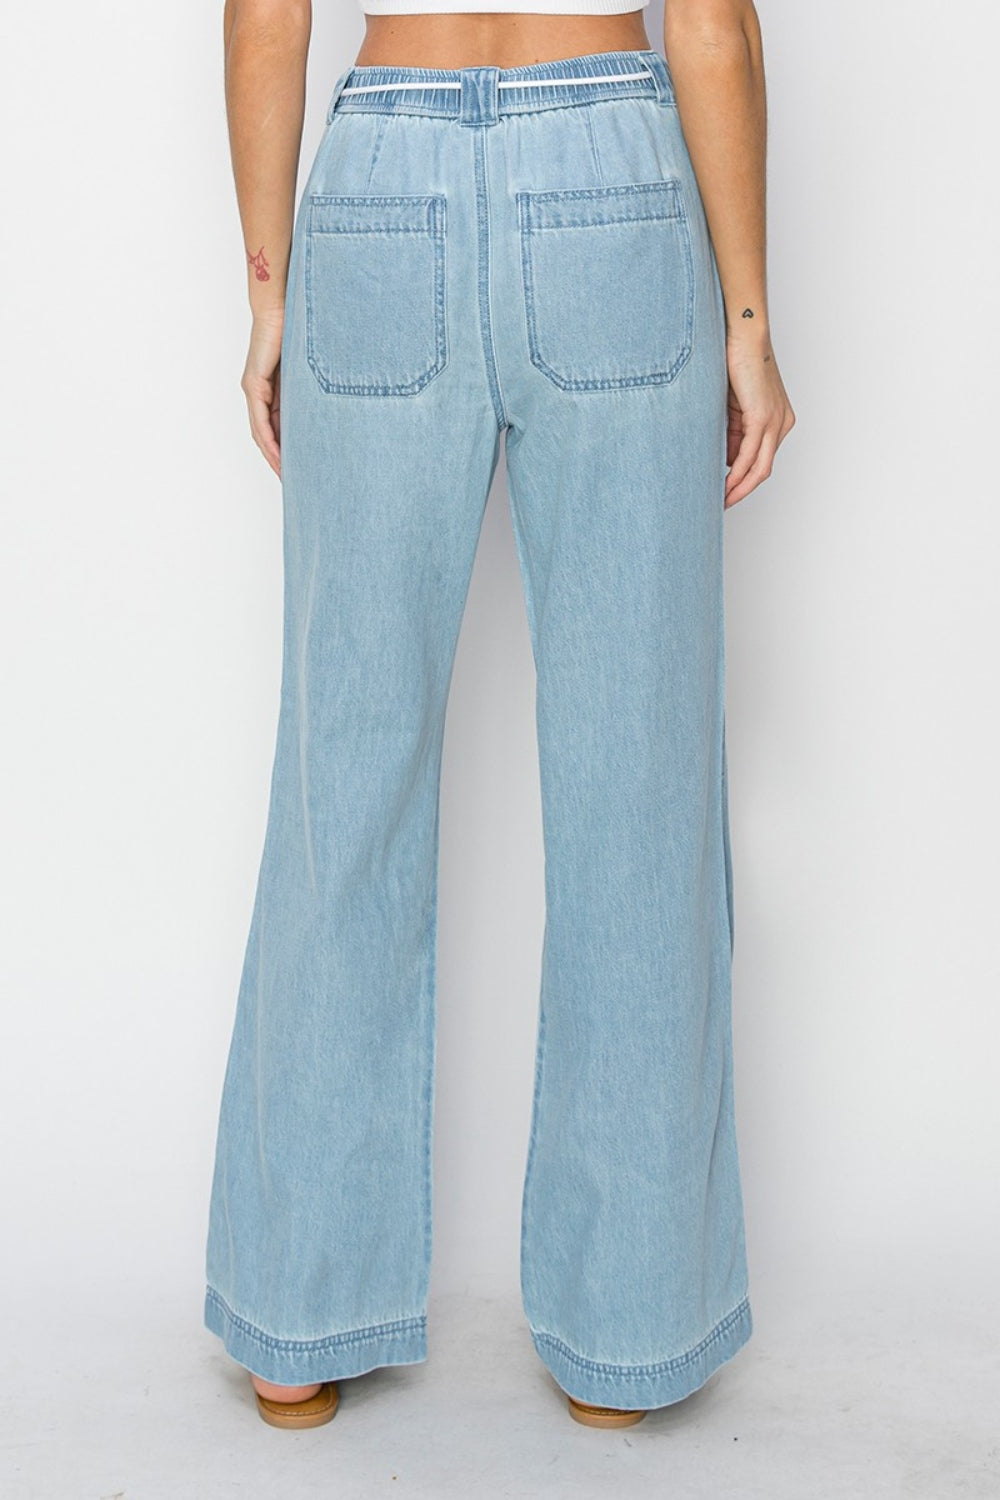 RISEN High Rise Straight Linen Style Jeans - OW *FINAL SALE*